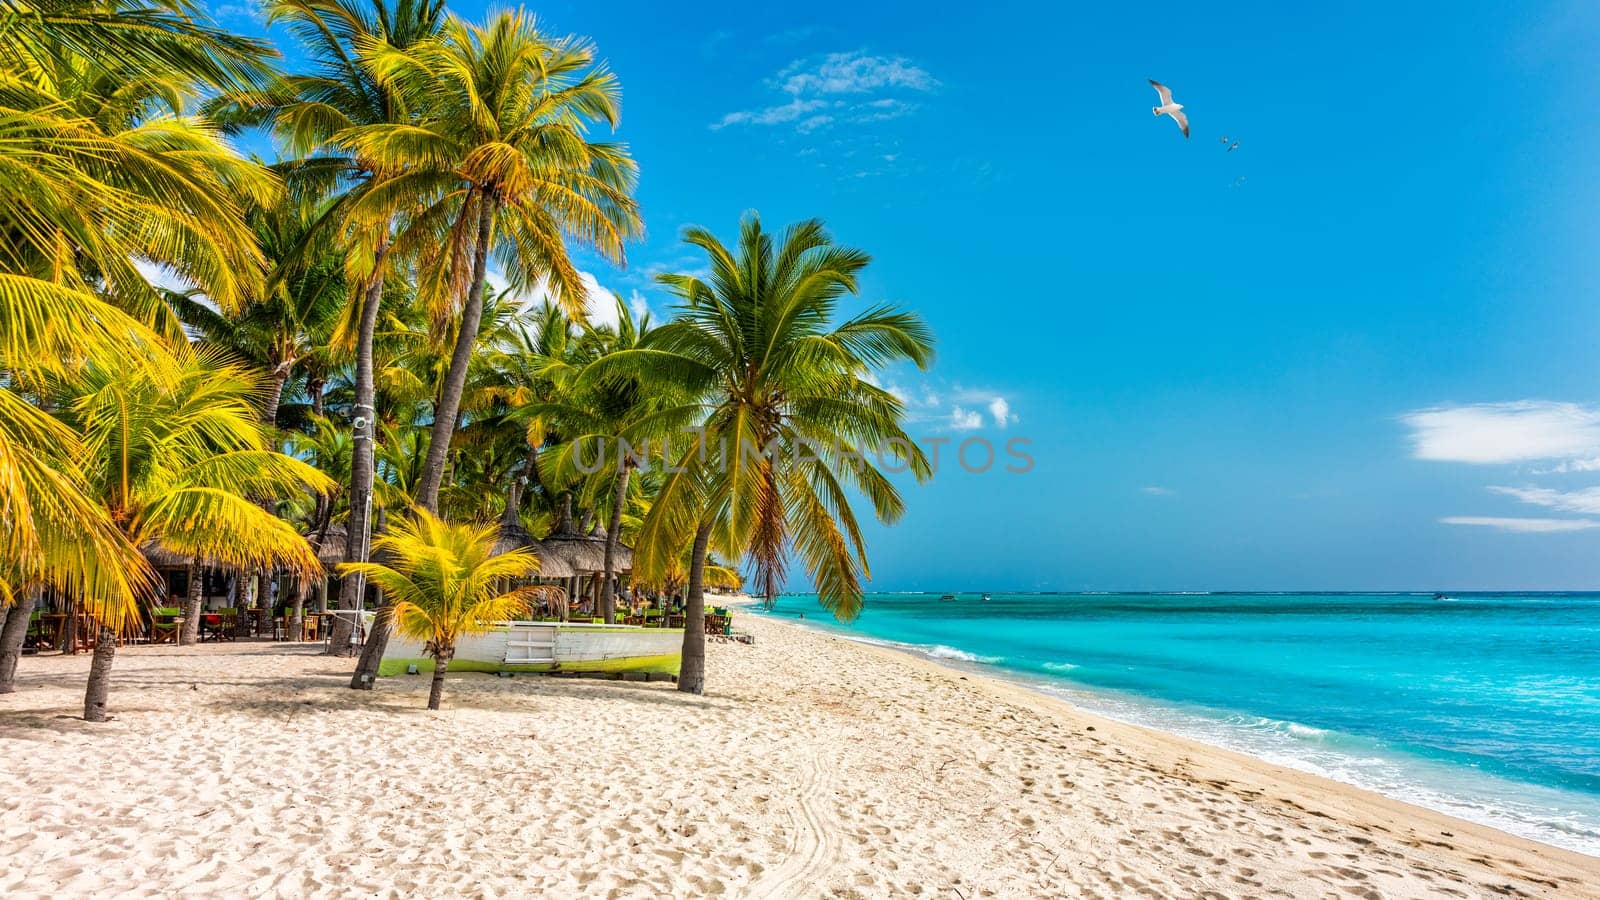 Paradise beach resort with palm trees and and tropical sea in Mauritius island. Summer vacation and tropical beach concept. Sandy beach with Le Morne beach on Mauritius island. Tropical landscape. by DaLiu